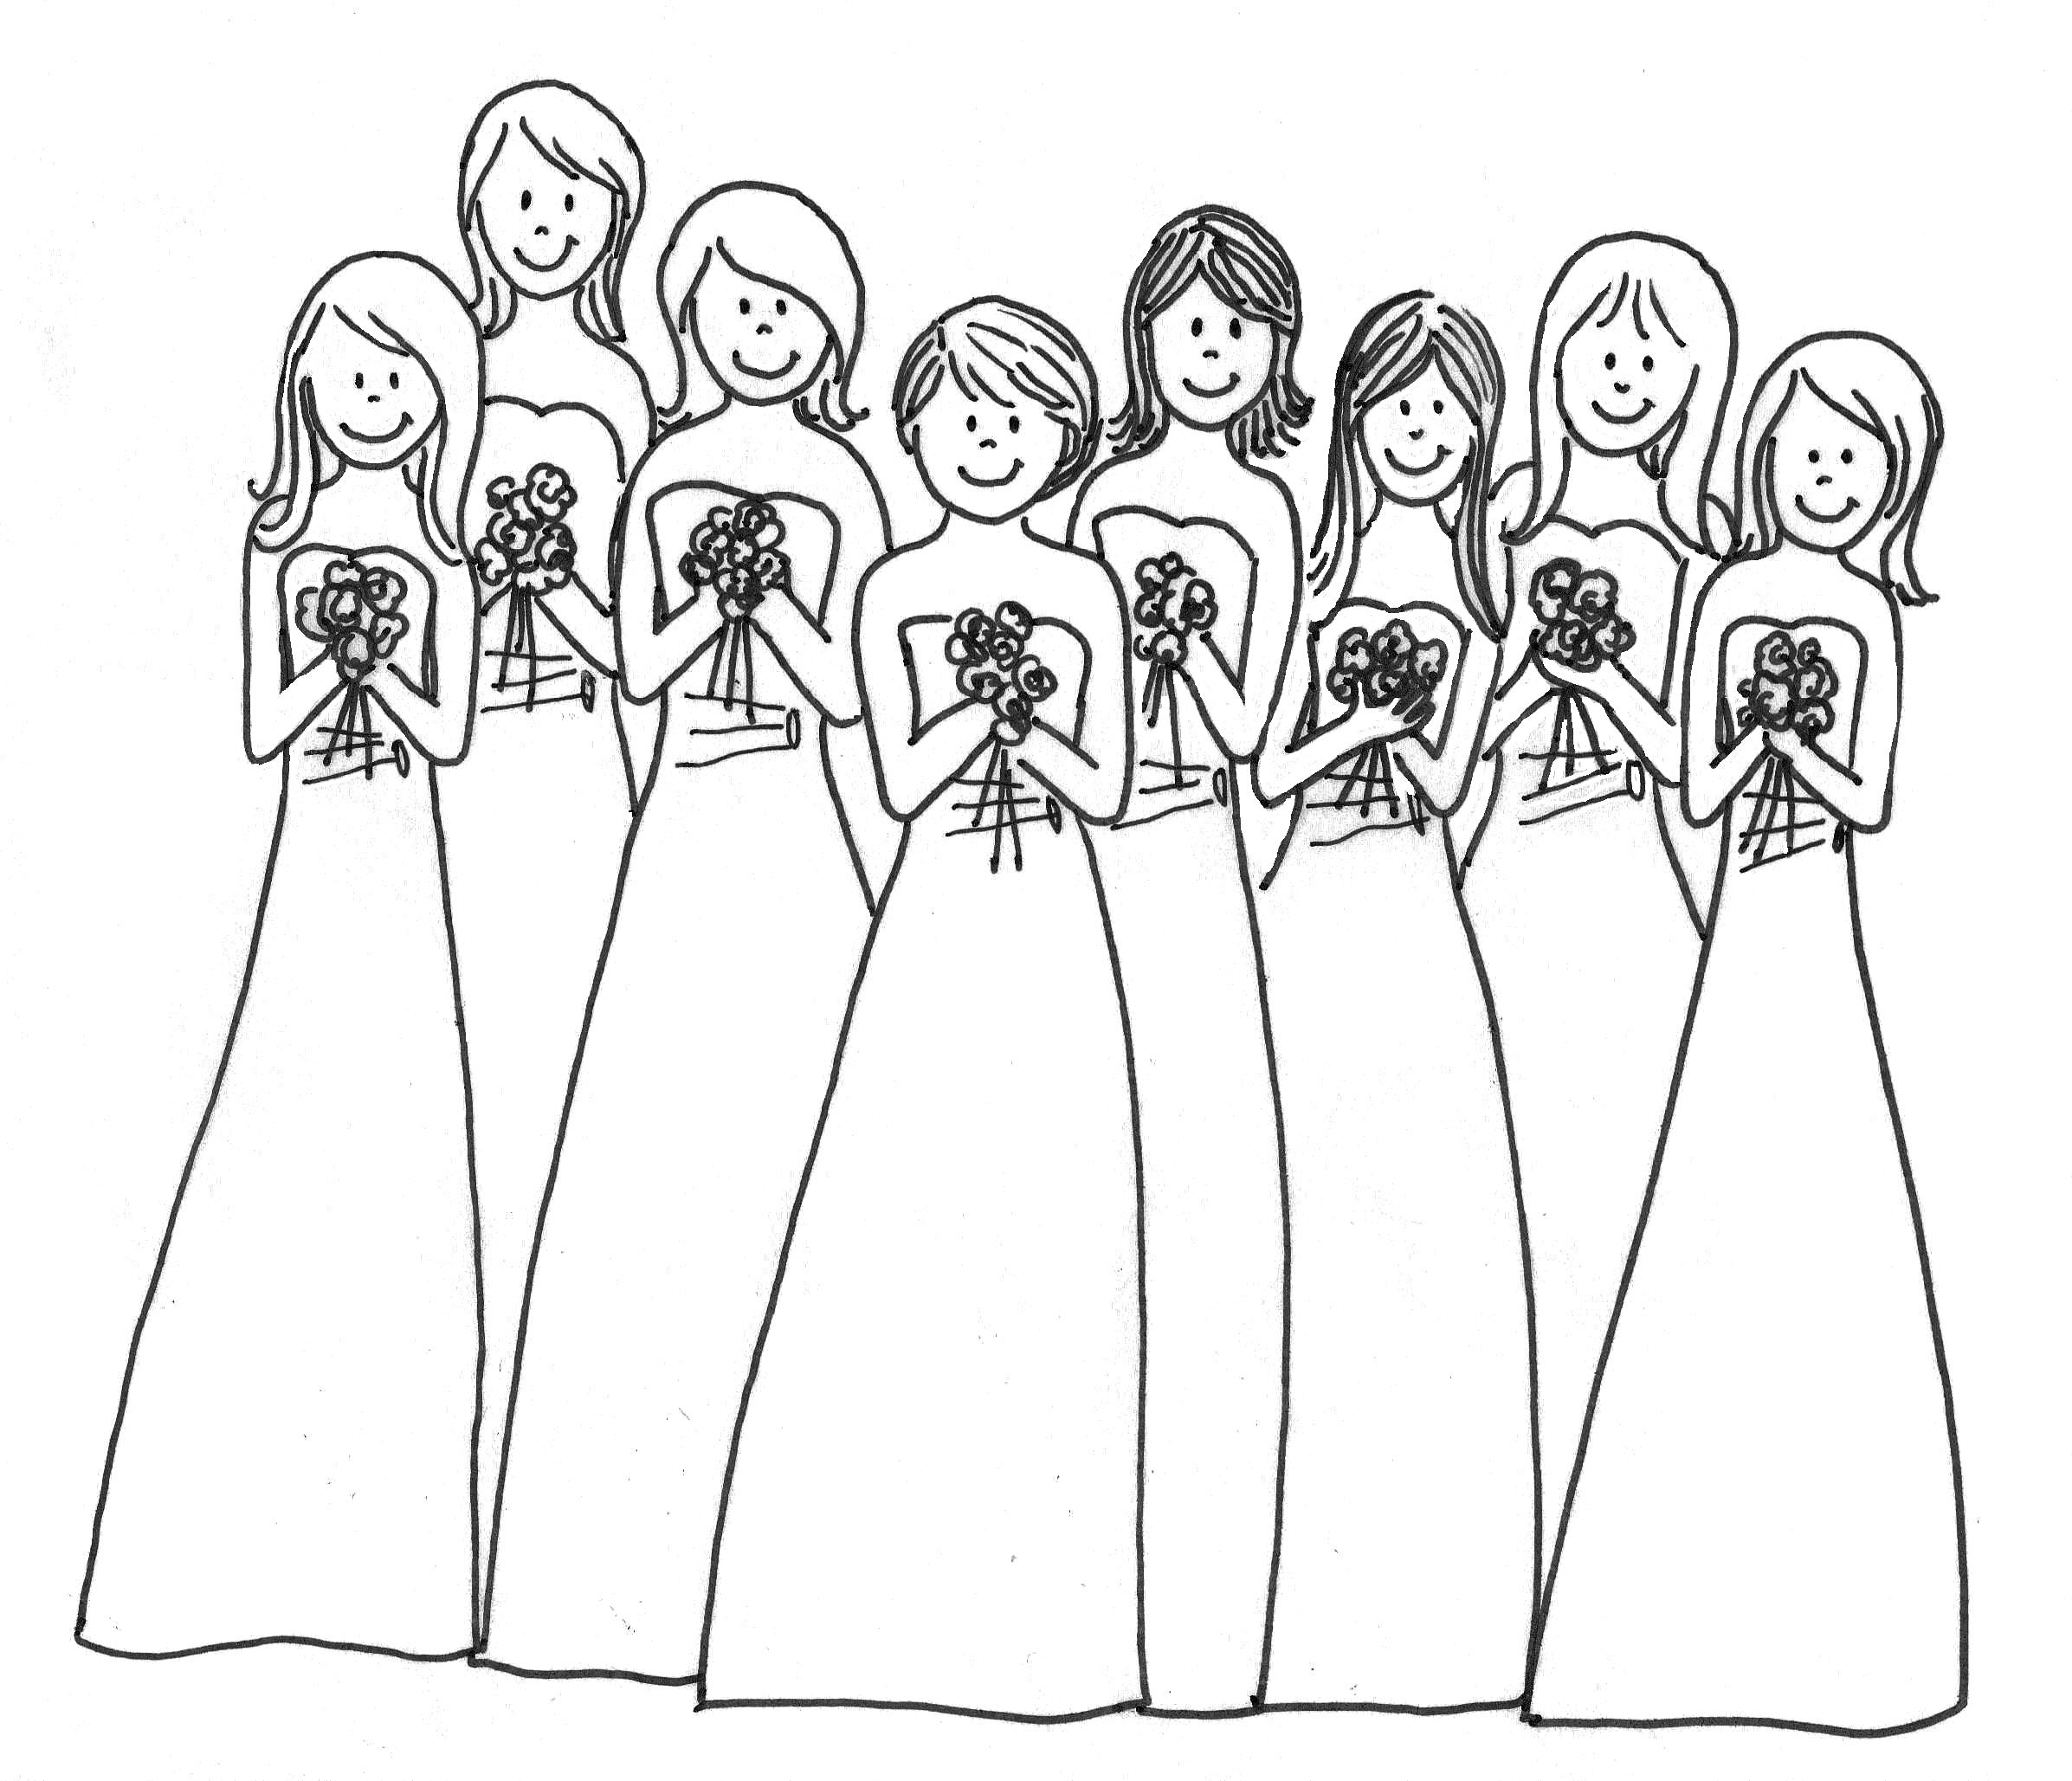 Wedding Activity Coloring Pages Kids Coloring Pages For Weddings With Wedding Books Free 10